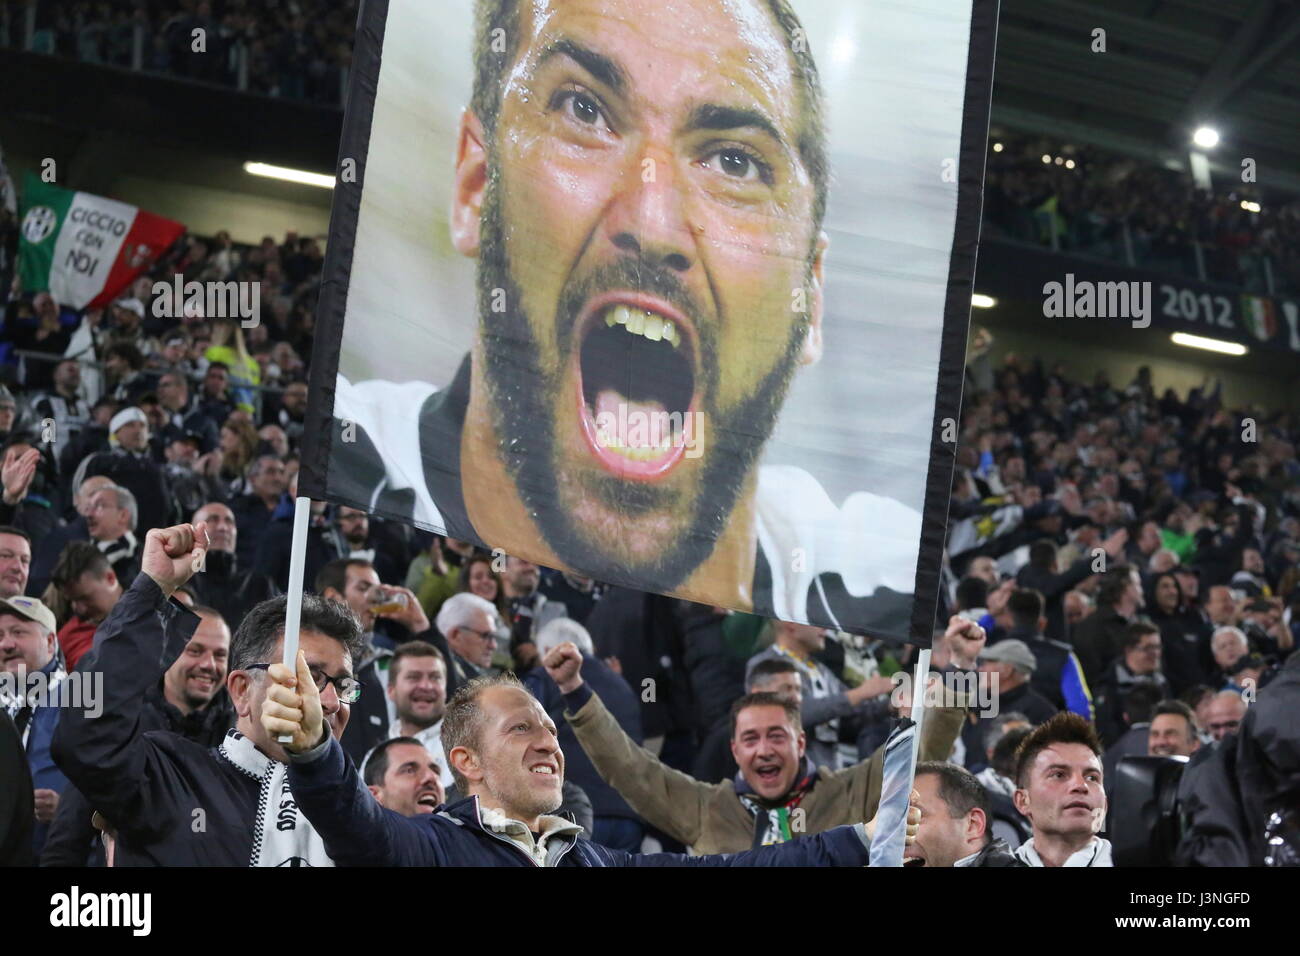 Turin, Italy. 6th May, 2017. A banner depicting Gonzalo Higuain exposed by Juventus fans after the goal of the draw scored by the Argentine striker during the Serie A football match between Juventus FC and Torino FC  at Juventus Stadium on may 06, 2017 in Turin, Italy. Credit: Massimiliano Ferraro/Alamy Live News Stock Photo